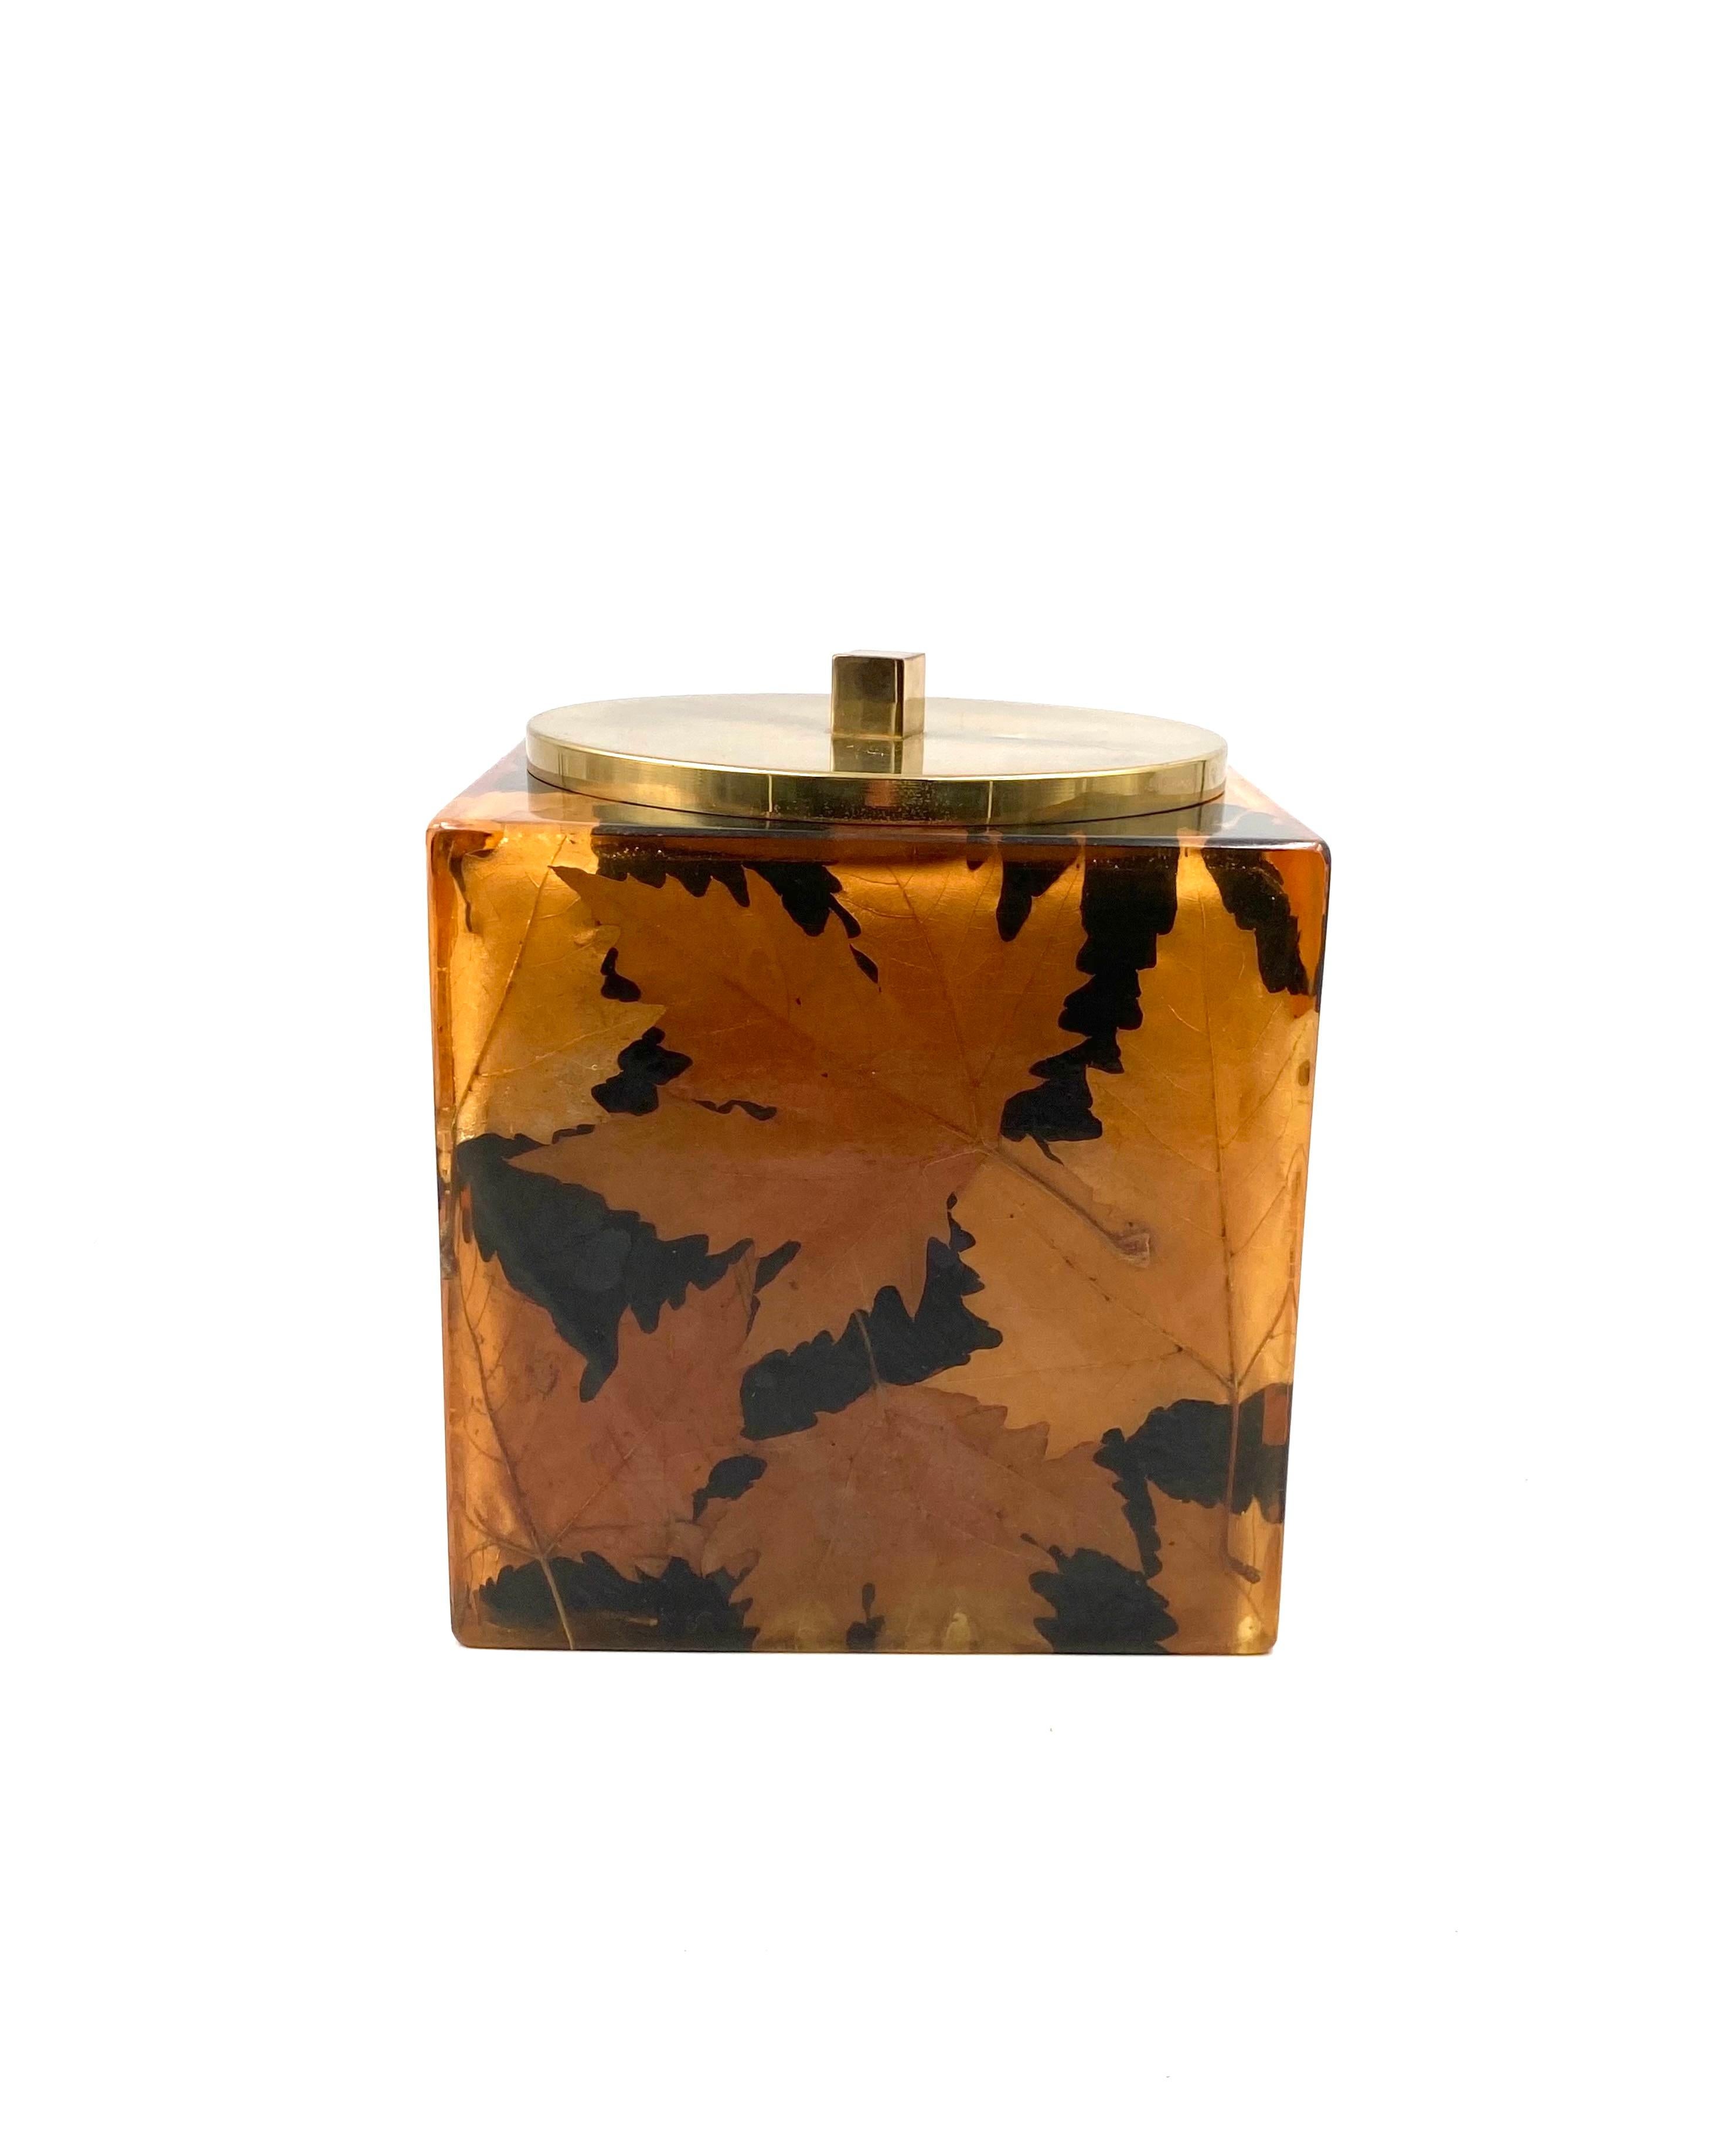 Hollywood regency brass and leaves resin ice bucket, Montagnani Florence 1970s For Sale 6